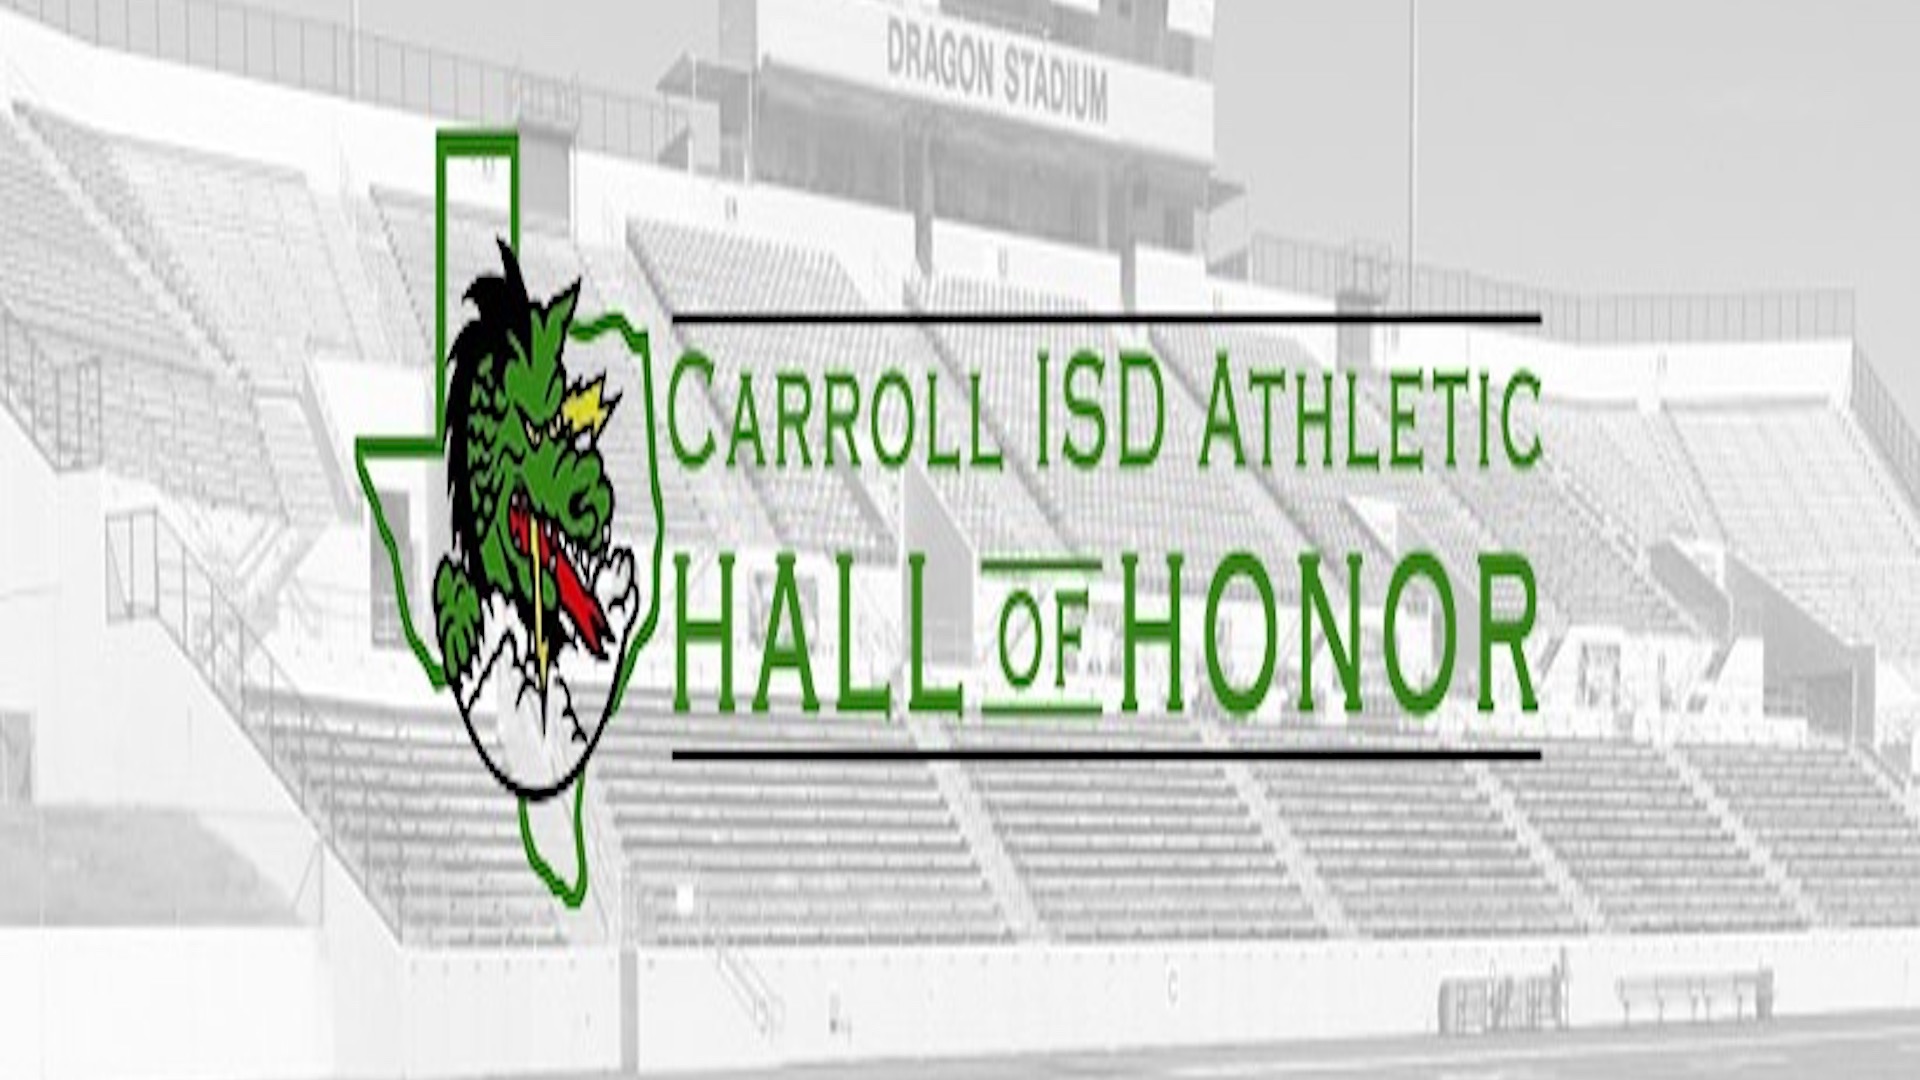 Slide 5 - Make plans for the Hall of Honor Banquet this Saturday.  Read Story here